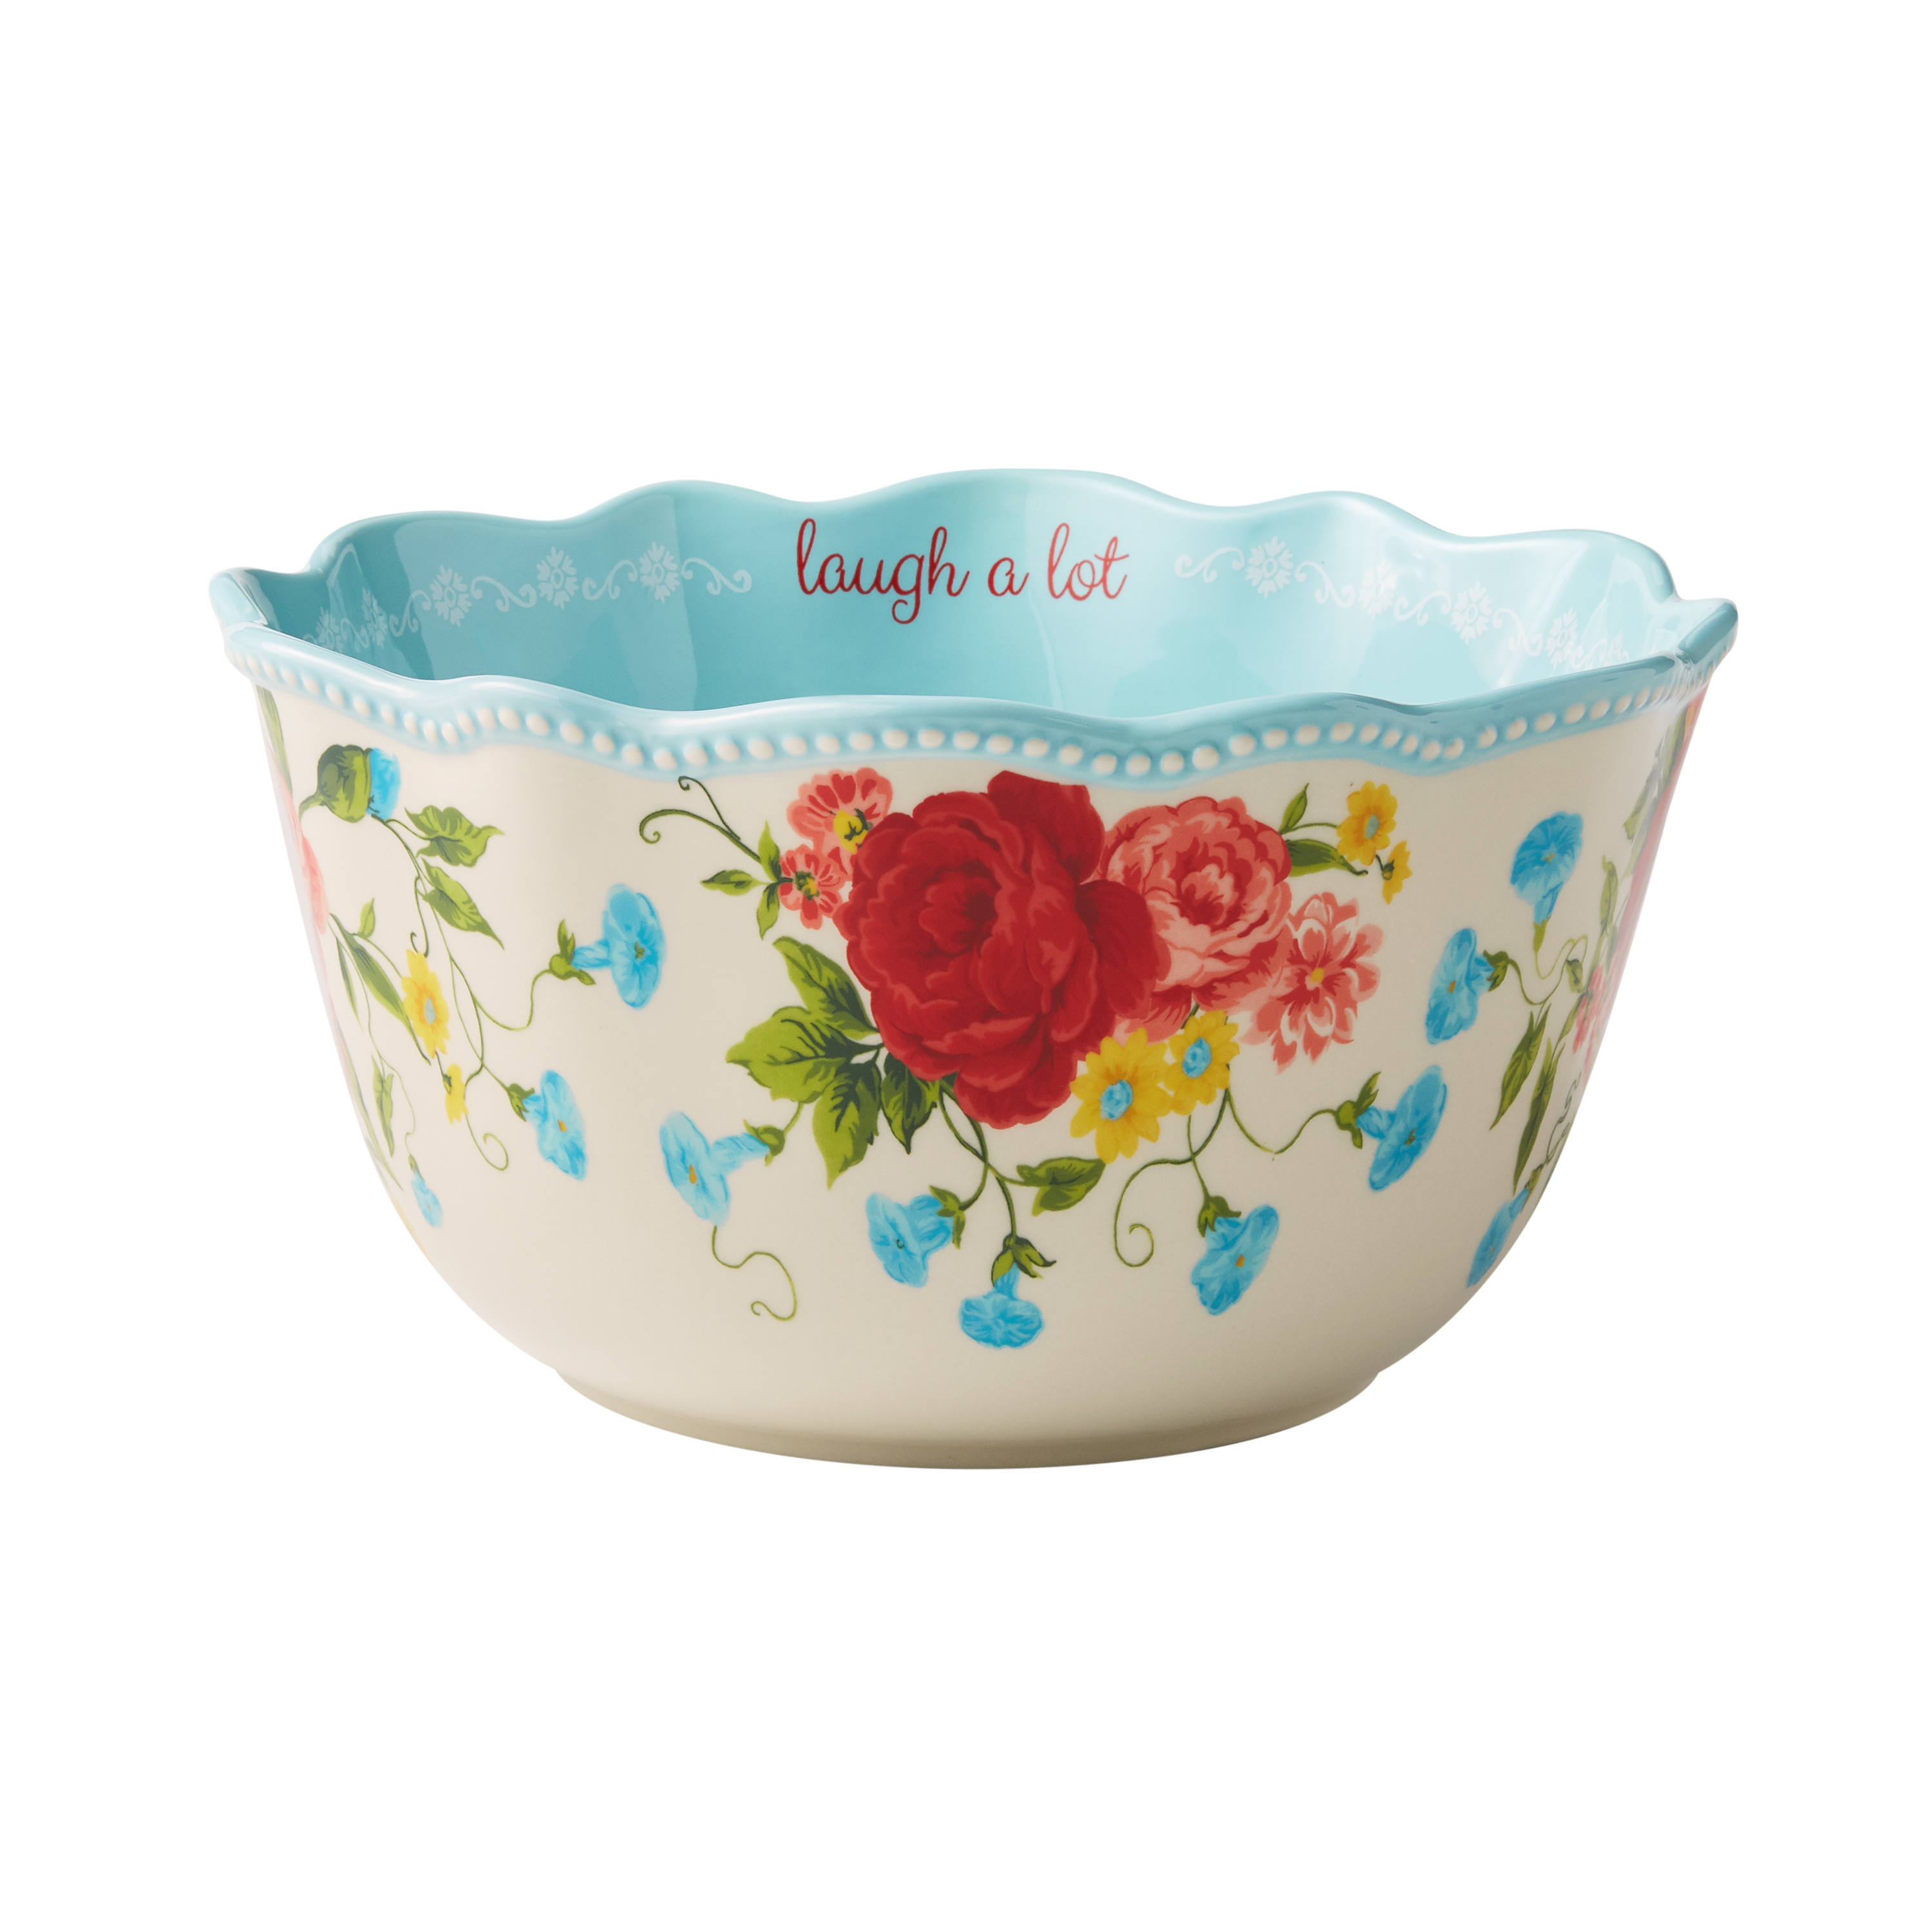 The Pioneer Woman Sweet Rose Sentiment Serving Bowls, 3-Piece Set - image 3 of 6